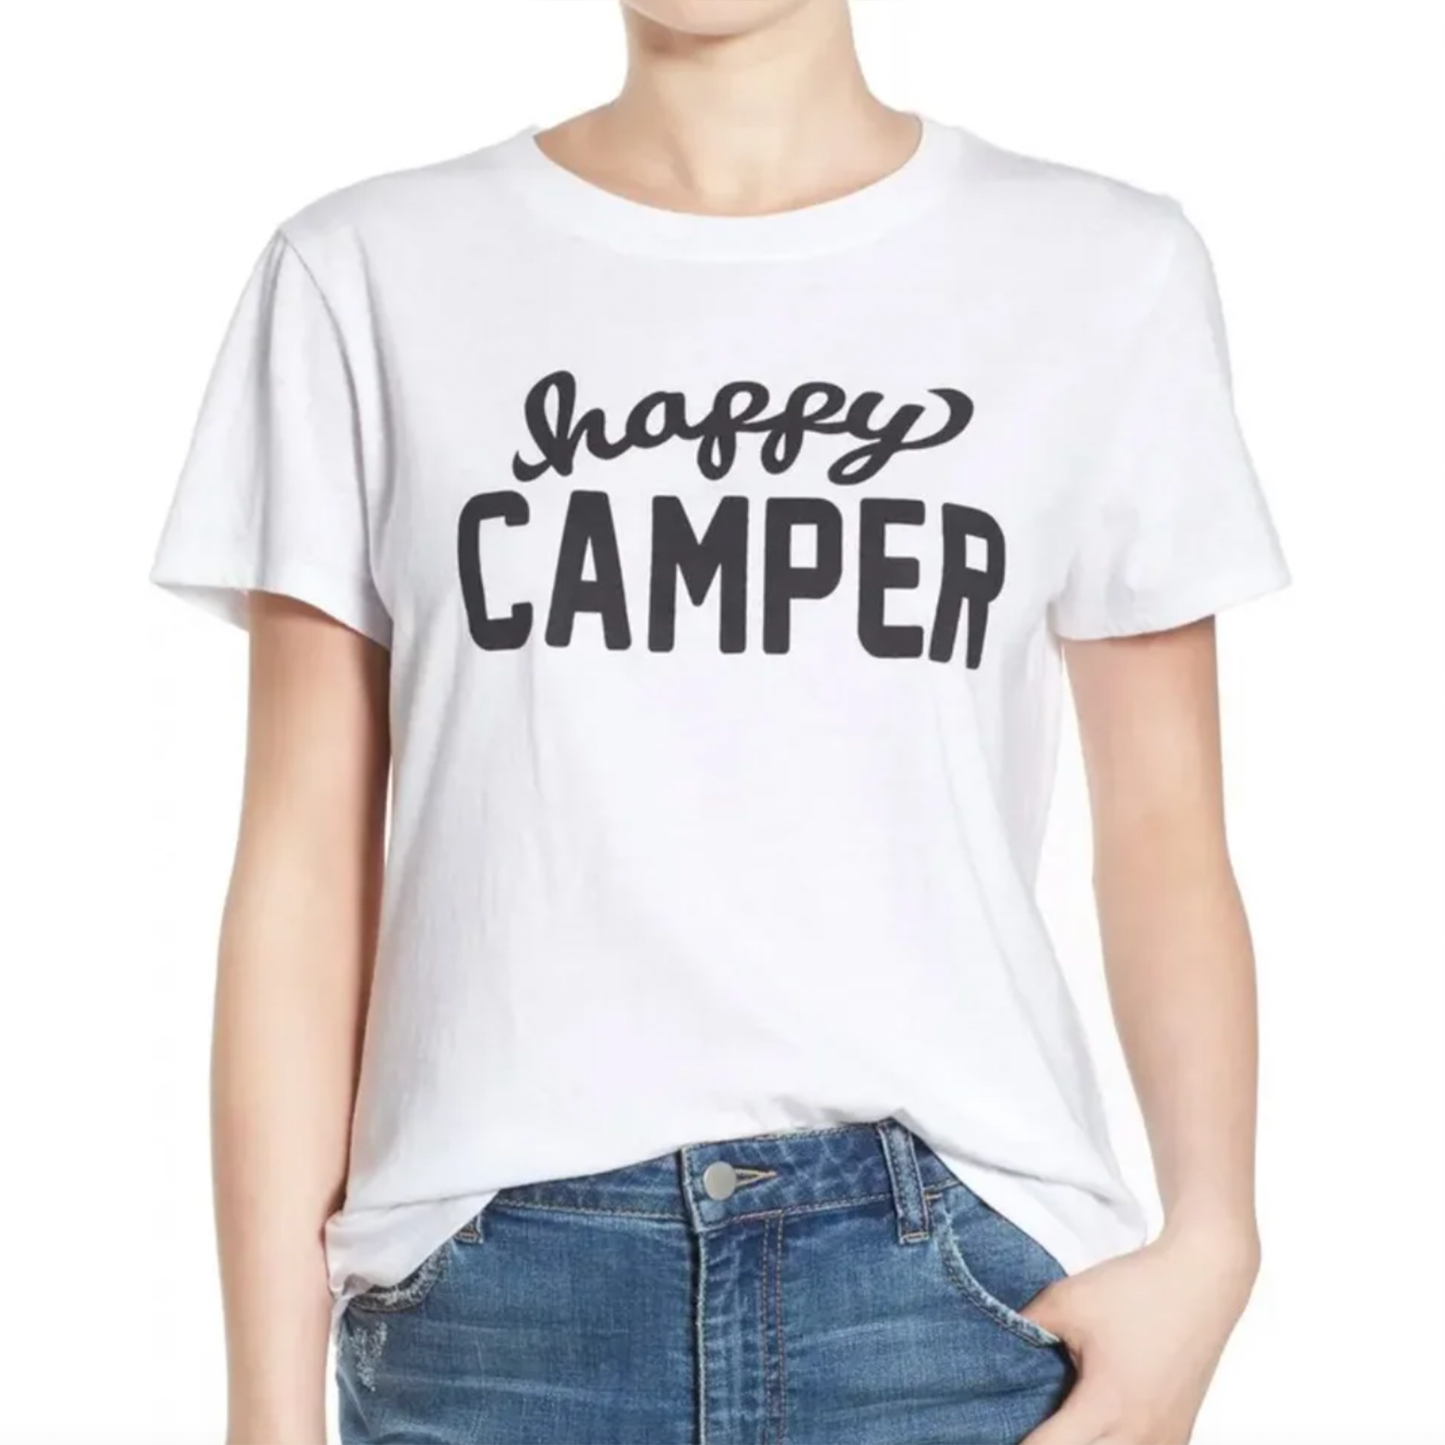 Suburban Riot Happy Camper Classic Tee. Show off your outdoorsy, adventurous spirit with the Happy Camper tee from Sub Urban Riot. Easily pair it with shorts, jeans, or a skirt for a cute, laid back, and carefree look. This tee will keep you a happy camper year round